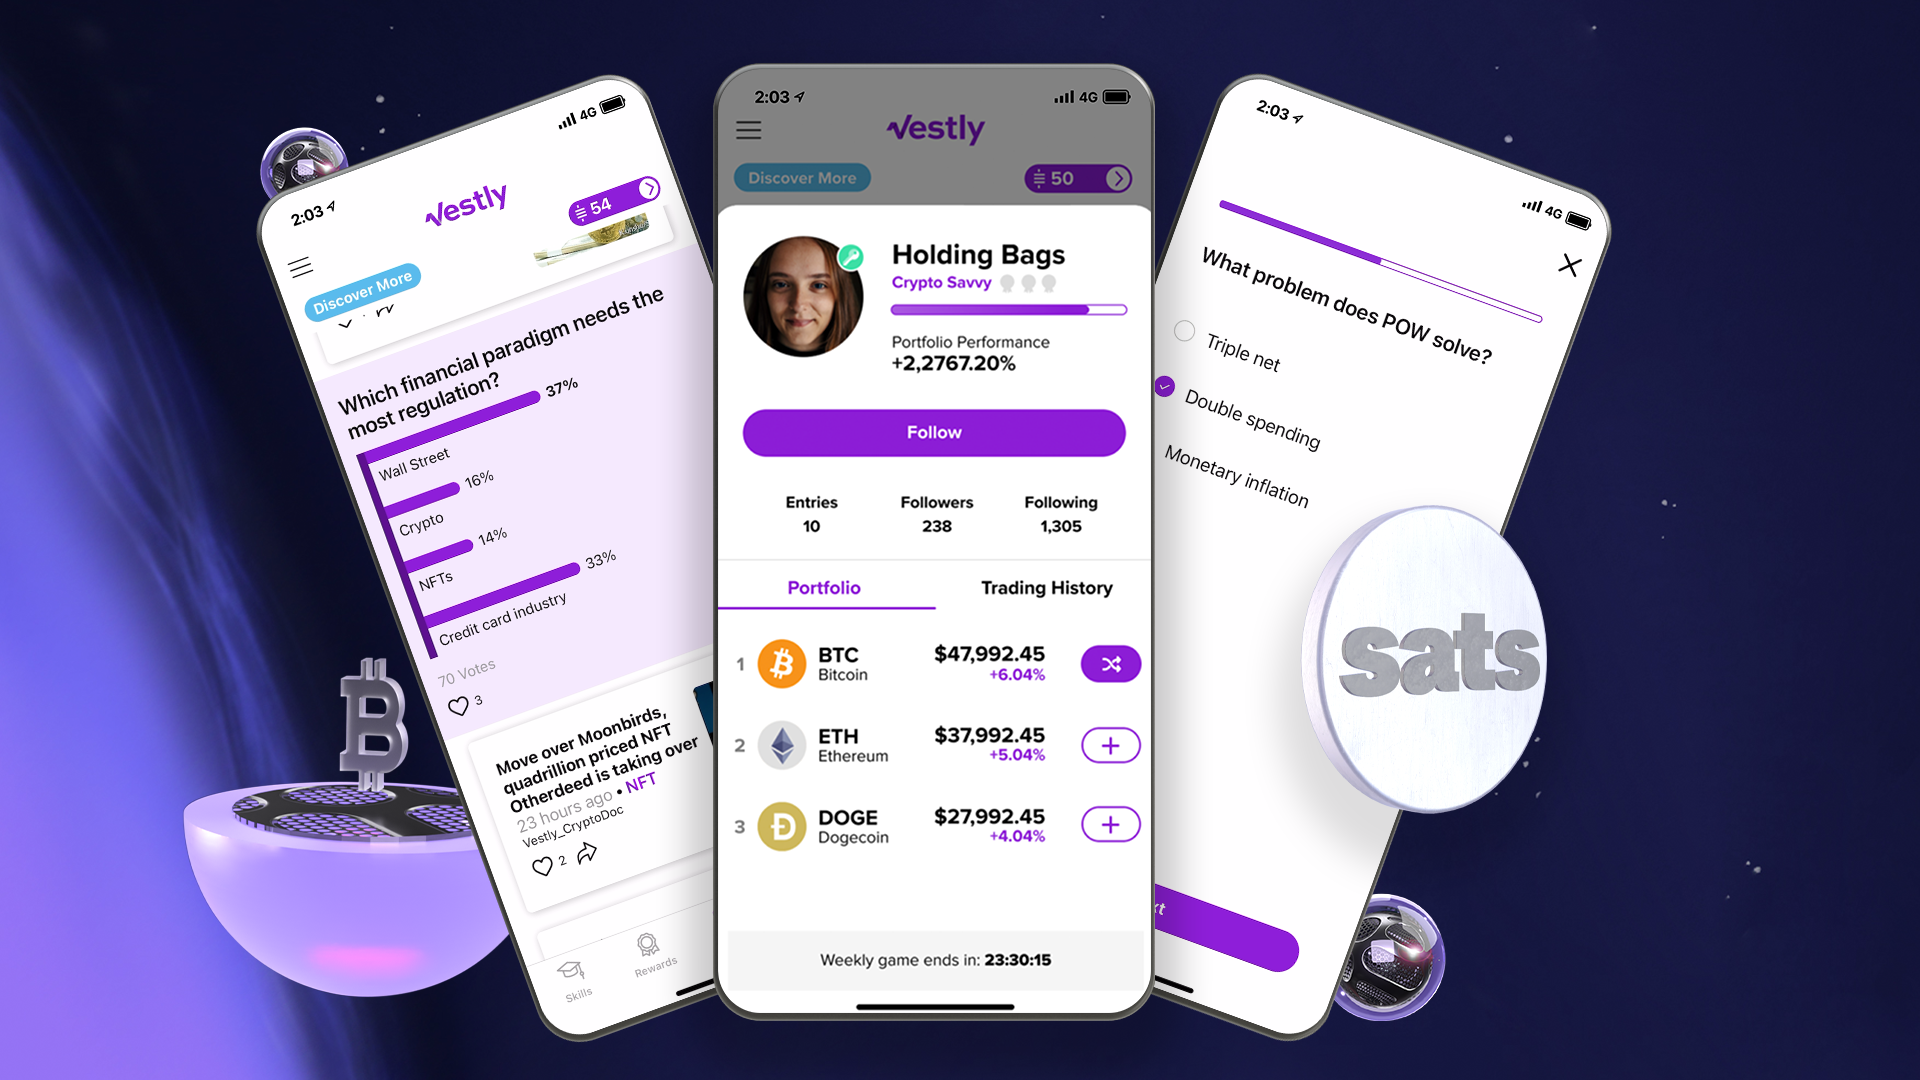 Learn about crypto with Vestly and earn Bitcoin.